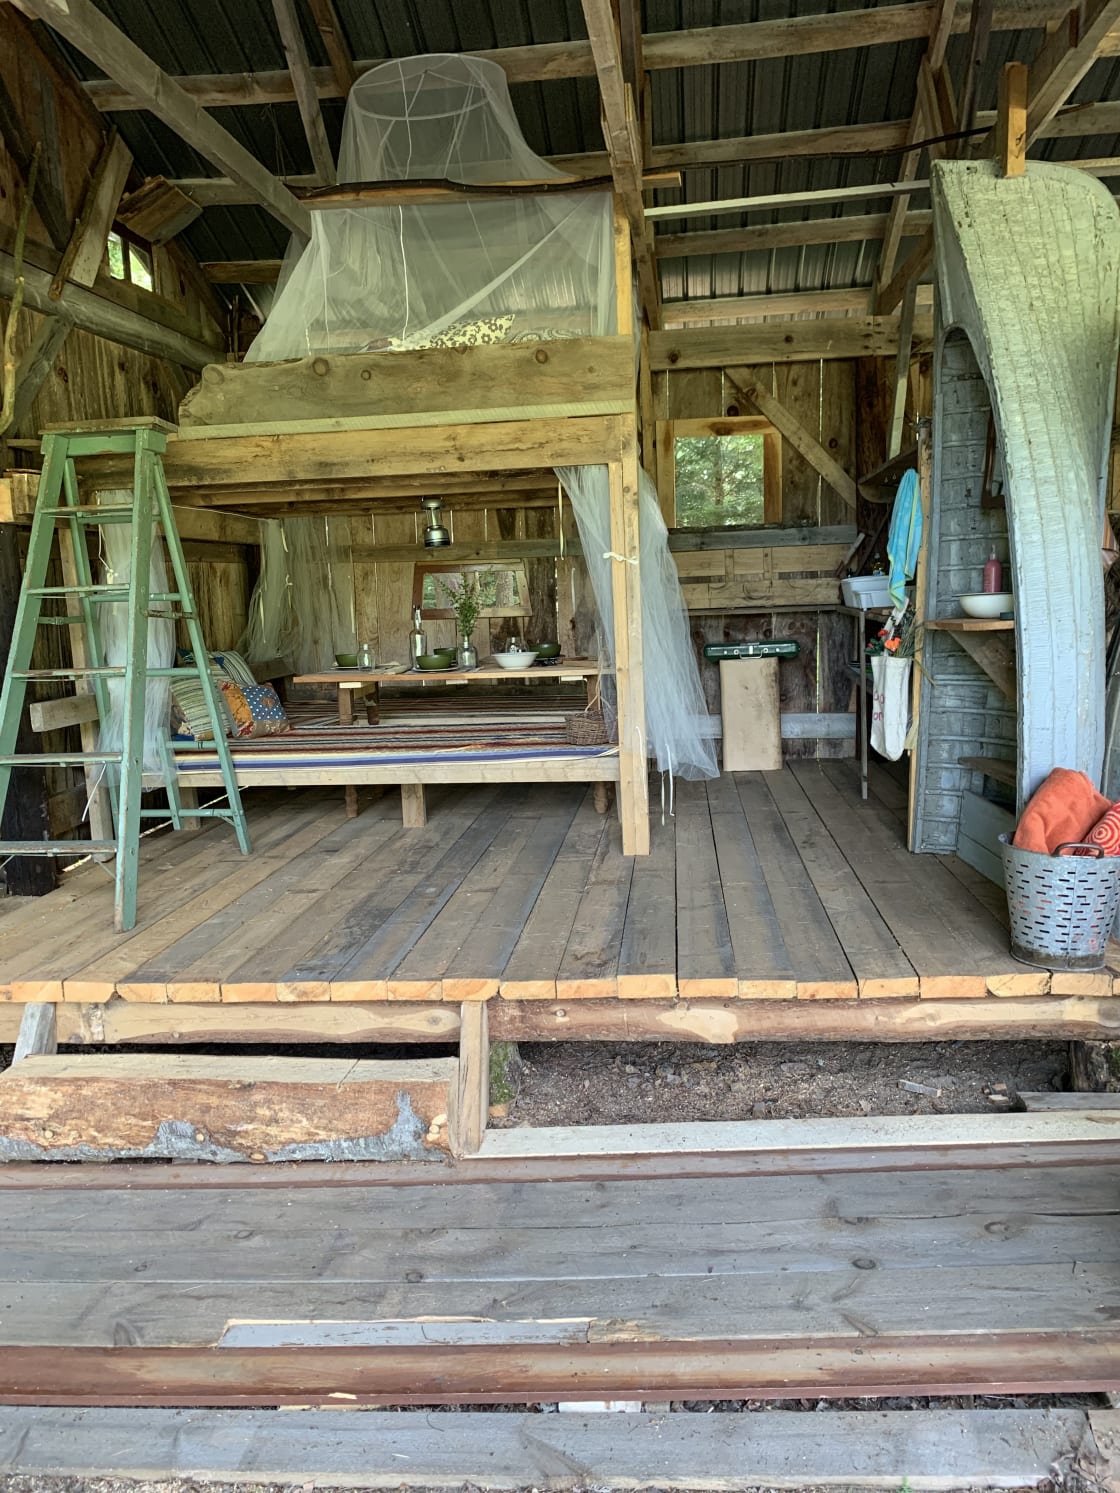 Step into the open barn, into the rustic setting with table and bench seating, countertop for cooking prep as well as cooking stove provided (if you didn’t want to cook on the fire), and best of all, a sleeping loft. All to keep you protected from weather!